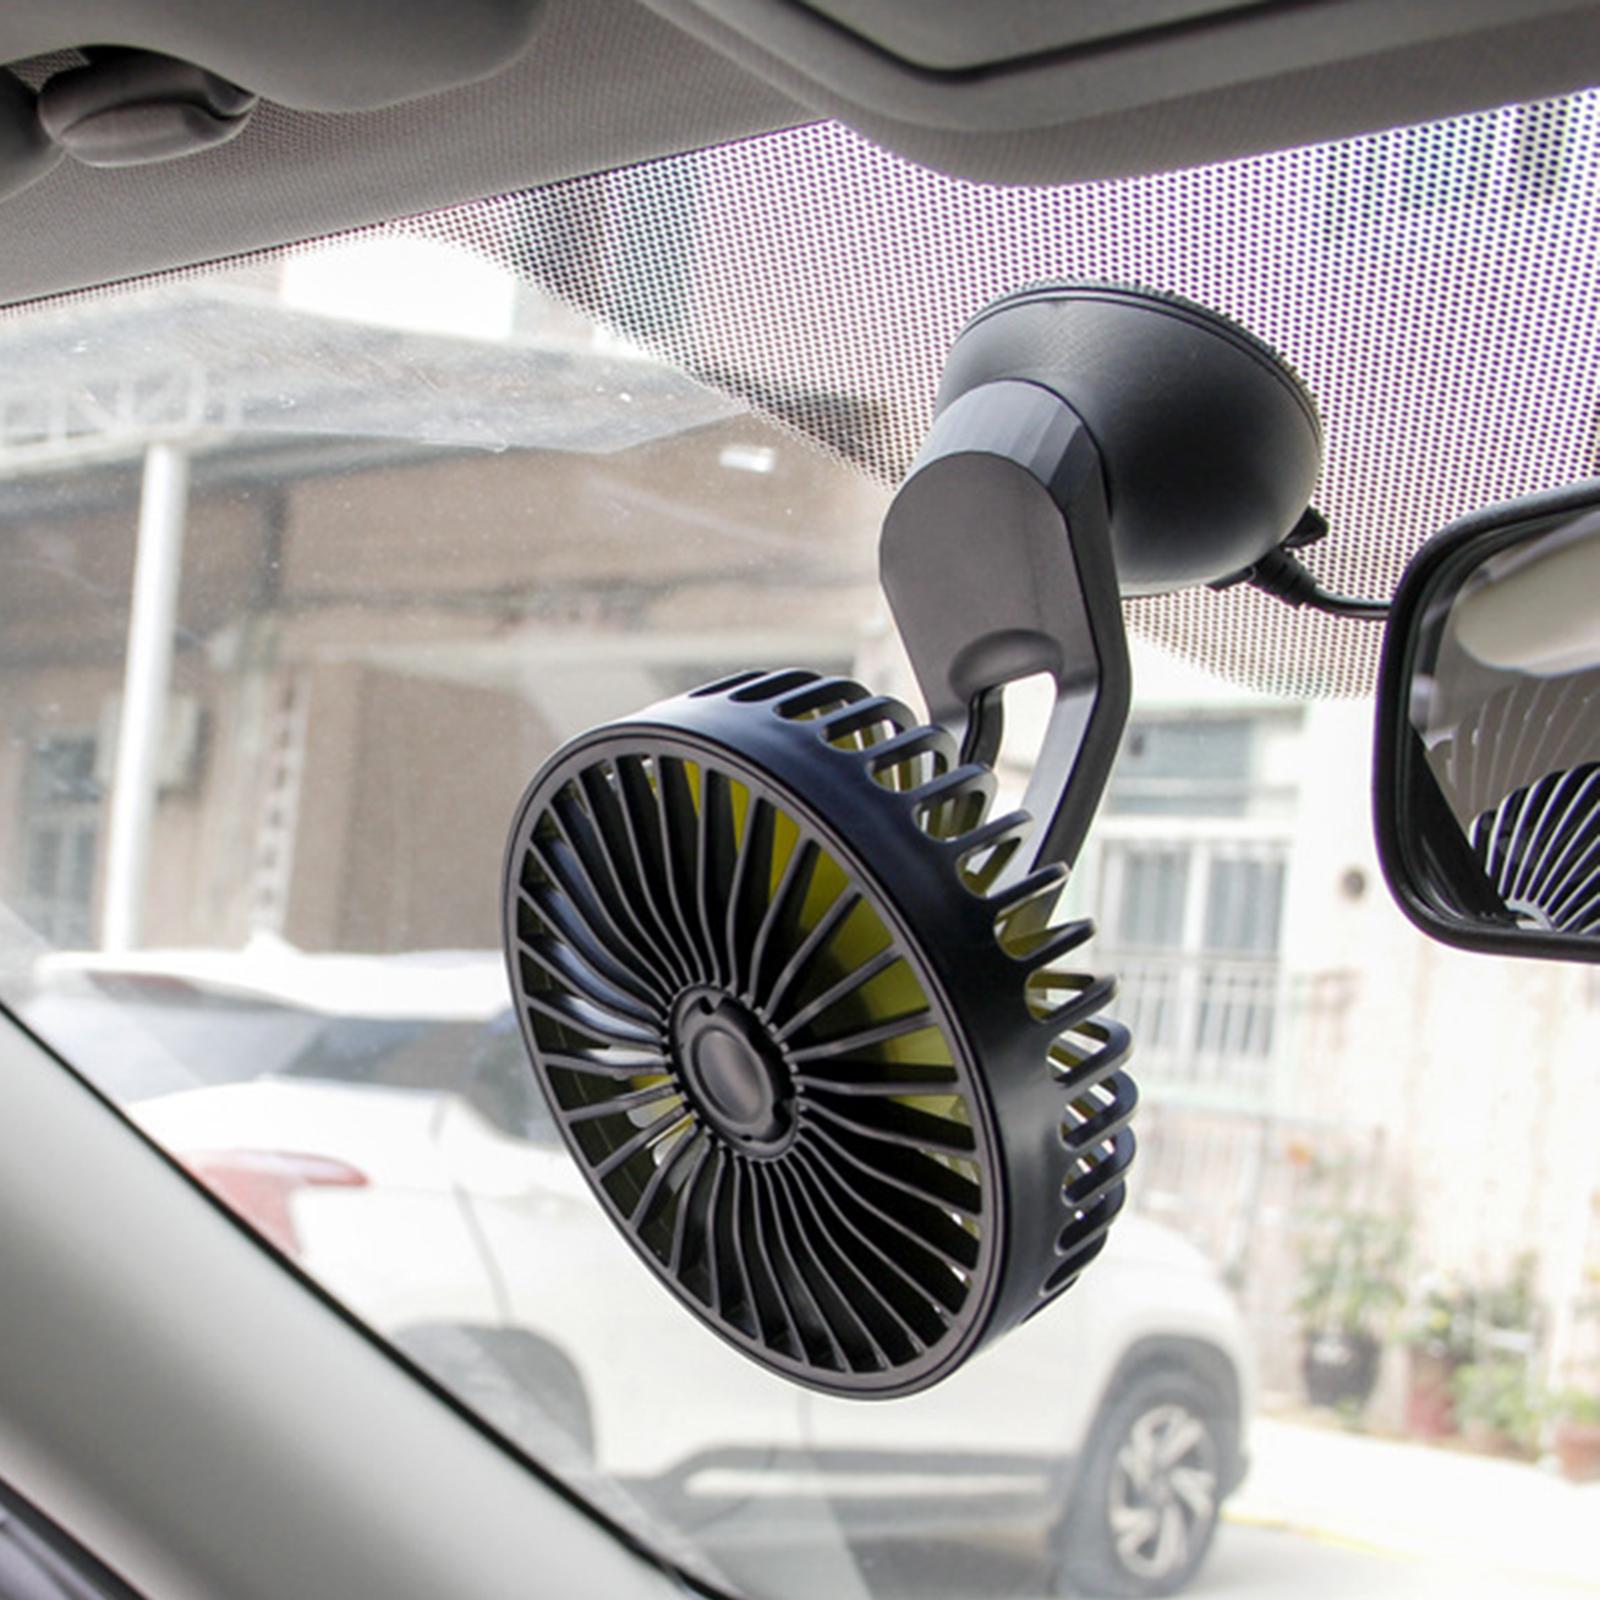 5V USB Fan Powerful Variable Speed Suction Cup Electric for Car Dashboard